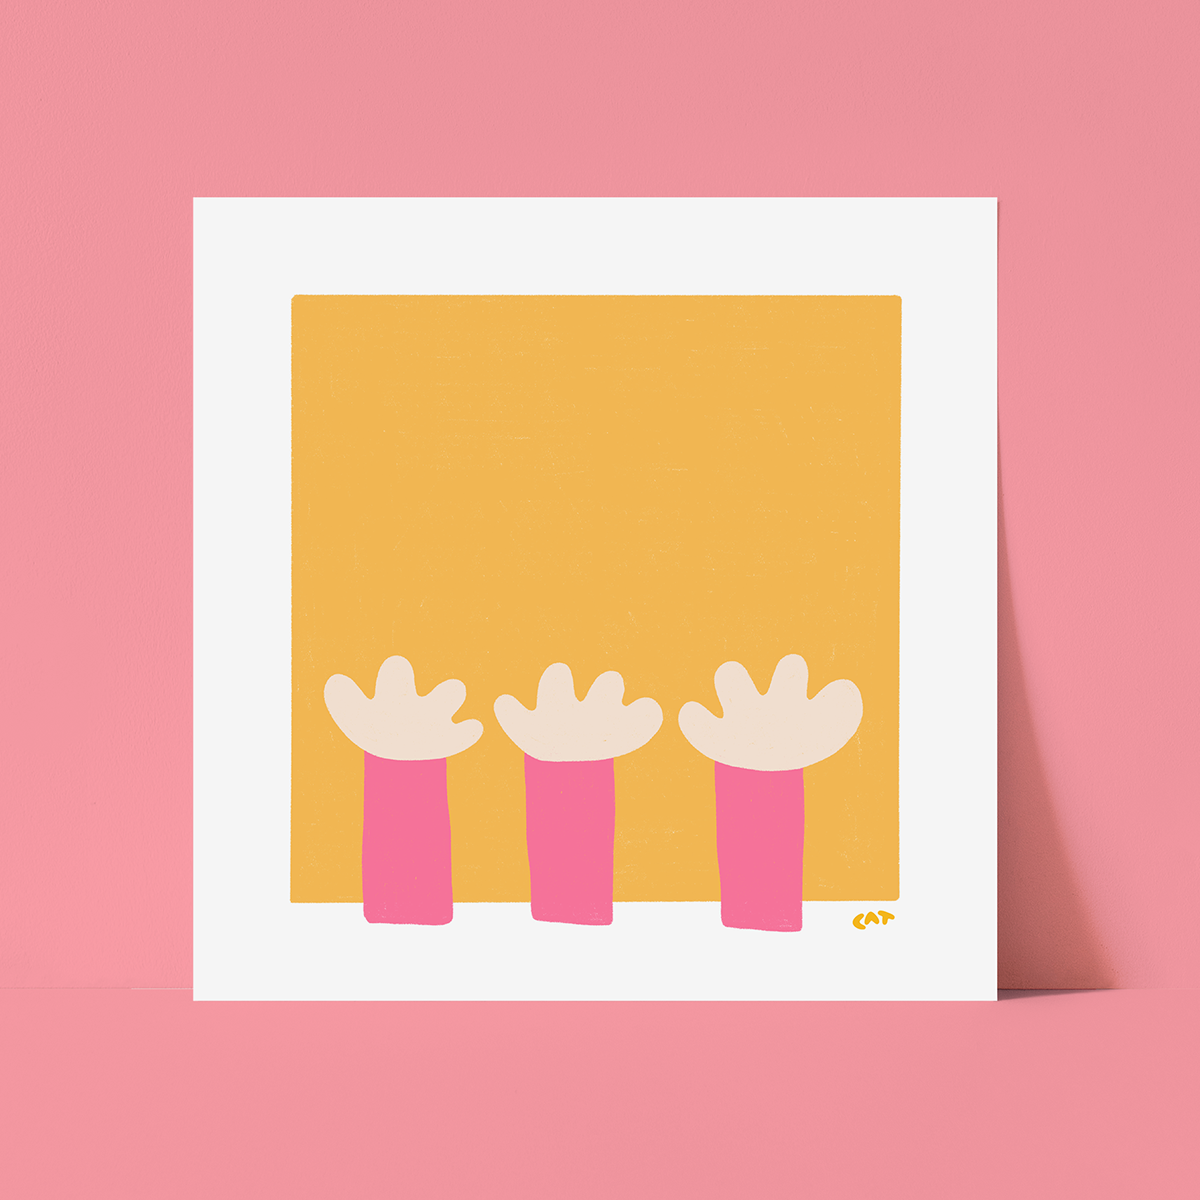 White unframed print of a yellow square with pink and white flower like objects.